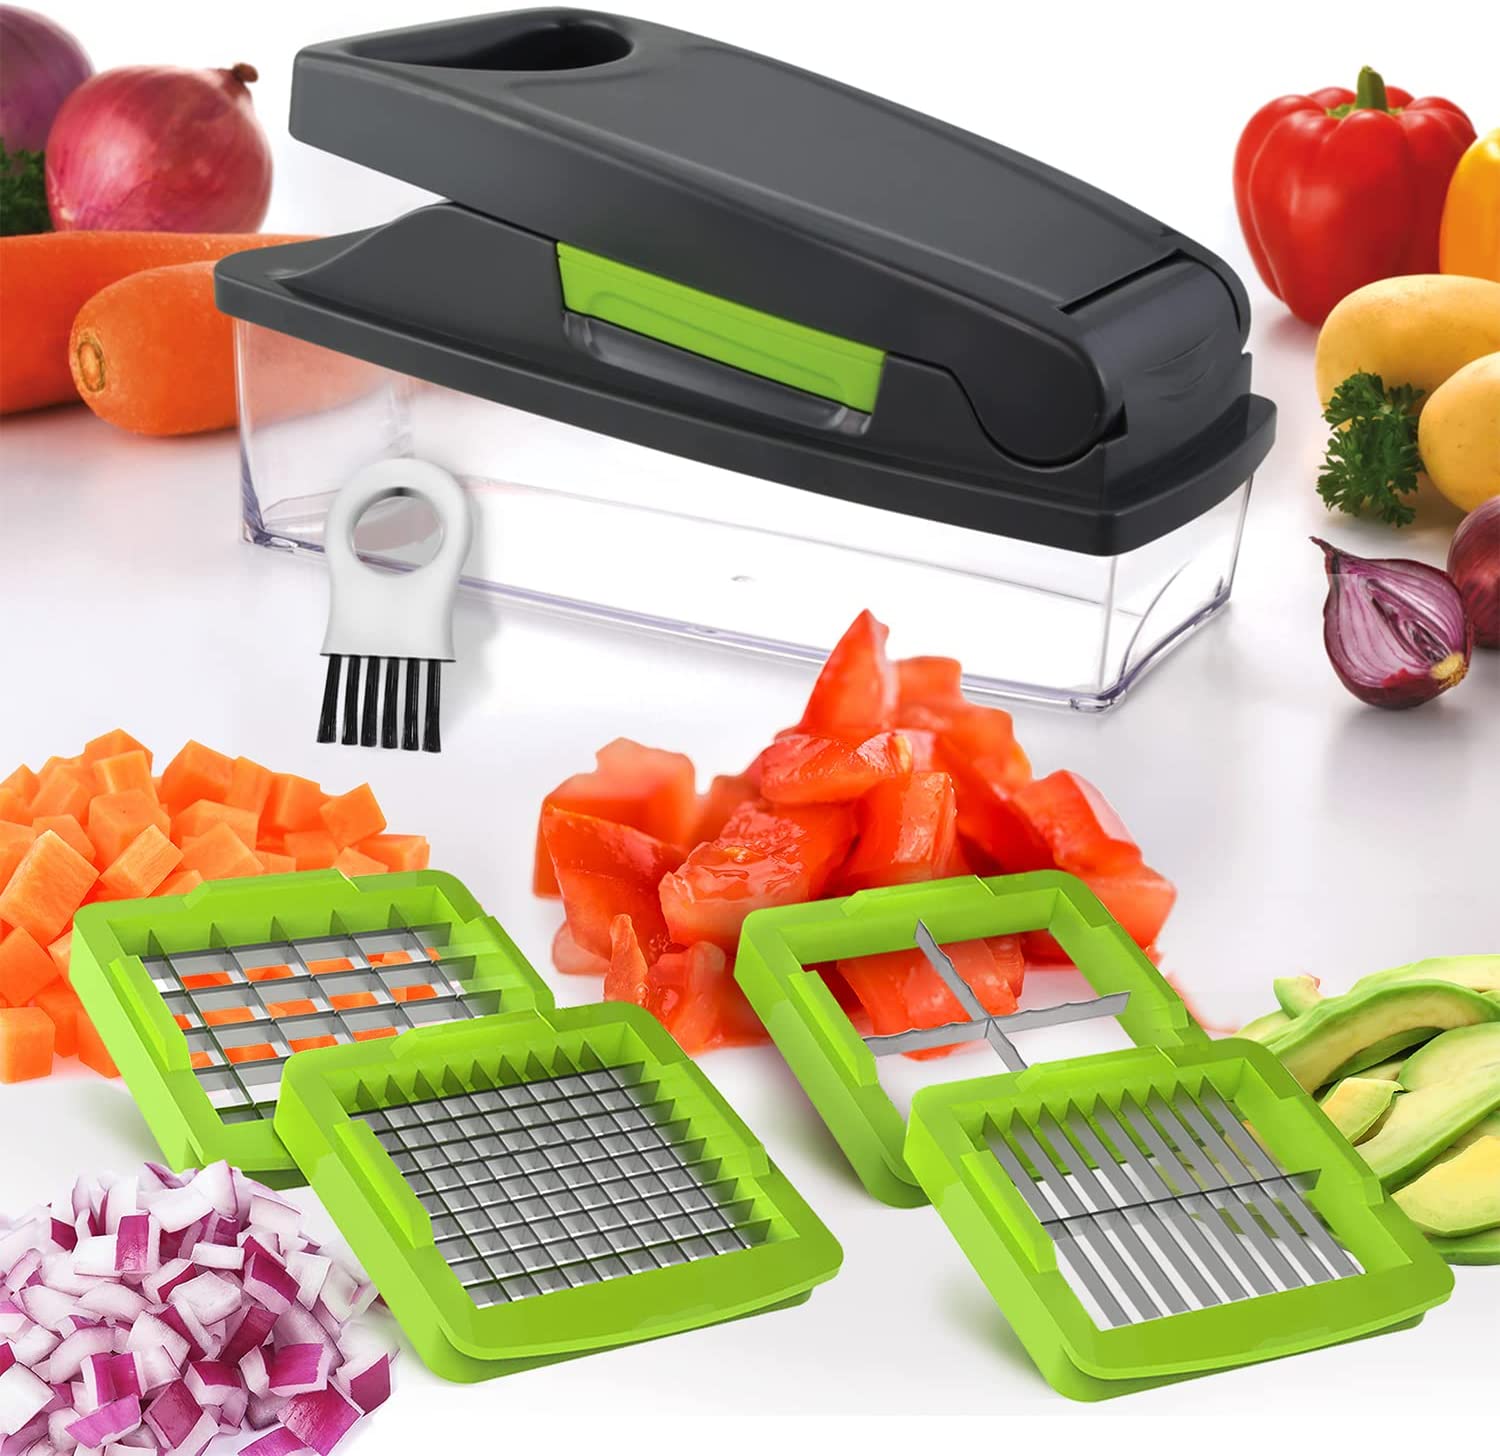 Waste No Time! Get A Best Vegetable Chopper To Do The Chop